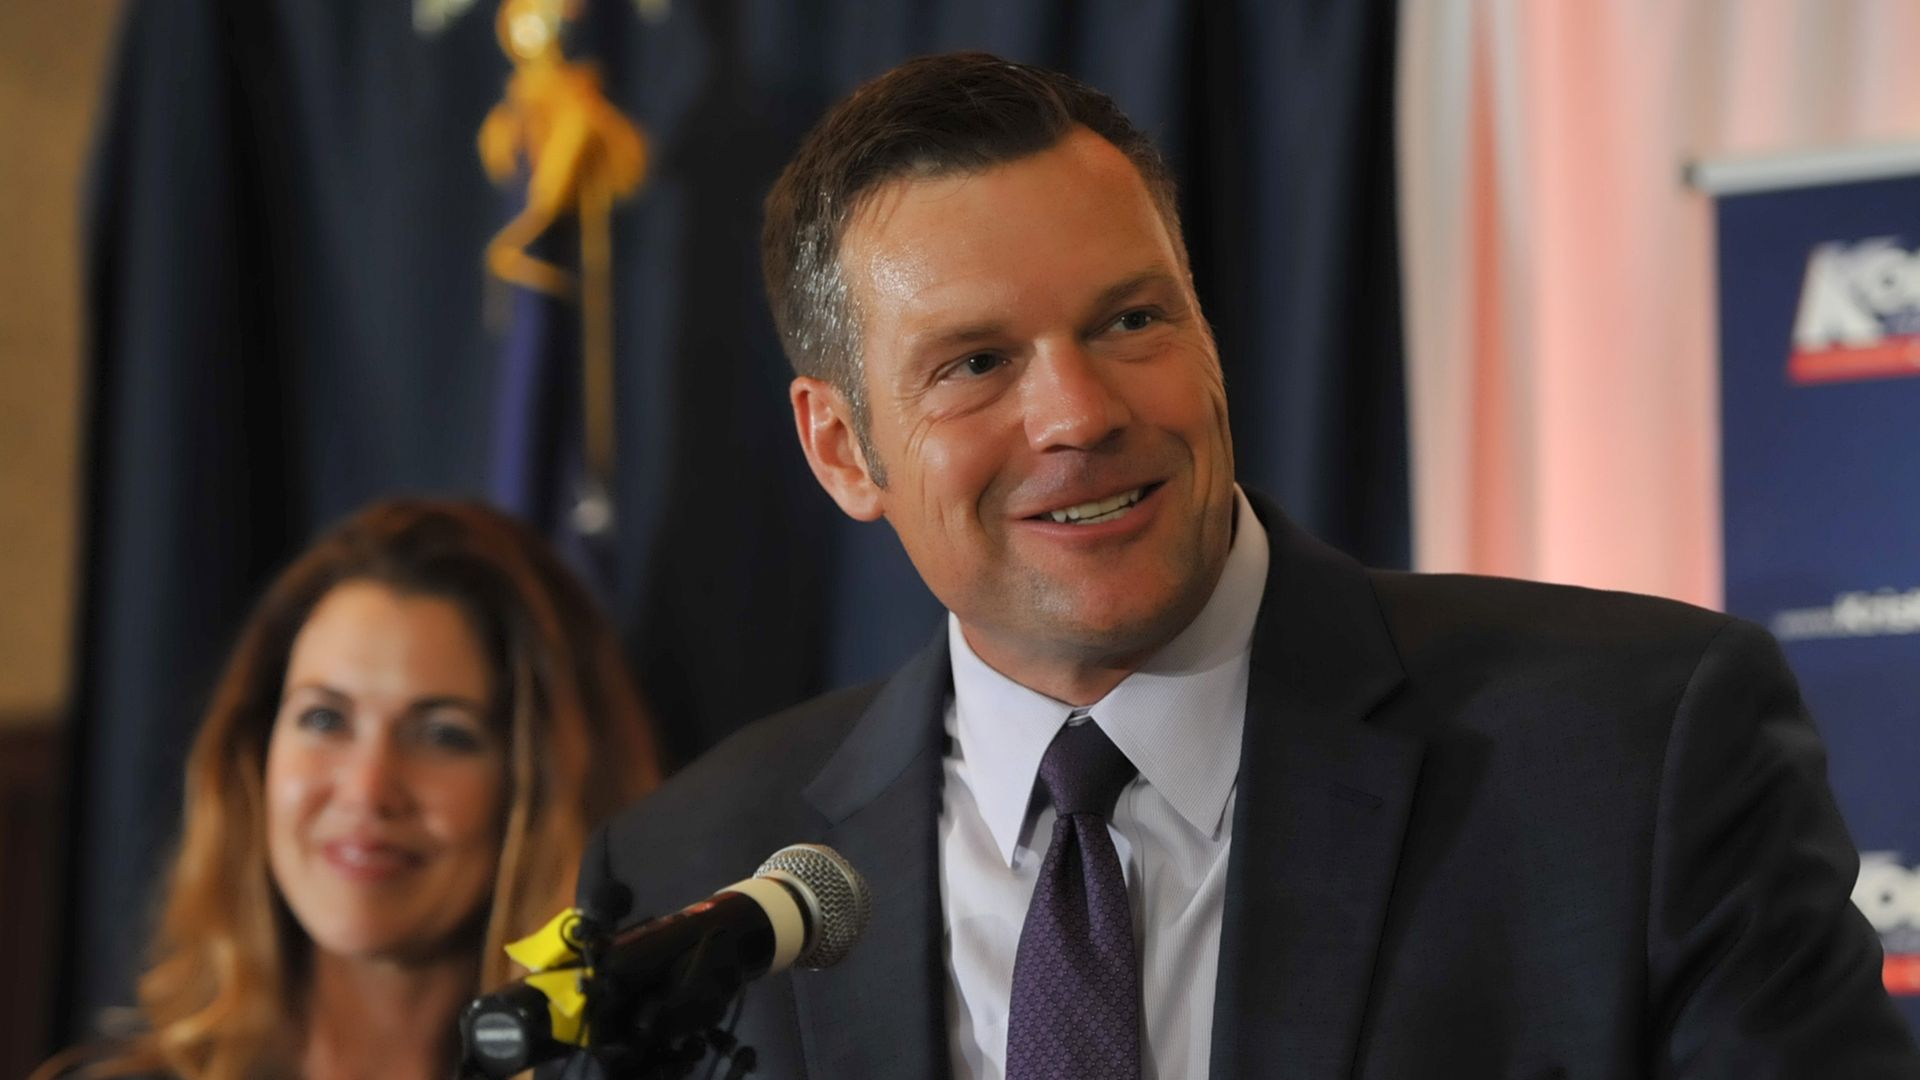 Republican primary candidate for Governor Kris Kobach, speaks to supporters just after Tuesday night’s tight race with Gov. Jeff Colyer. Photo: Steve Pope/Getty Images